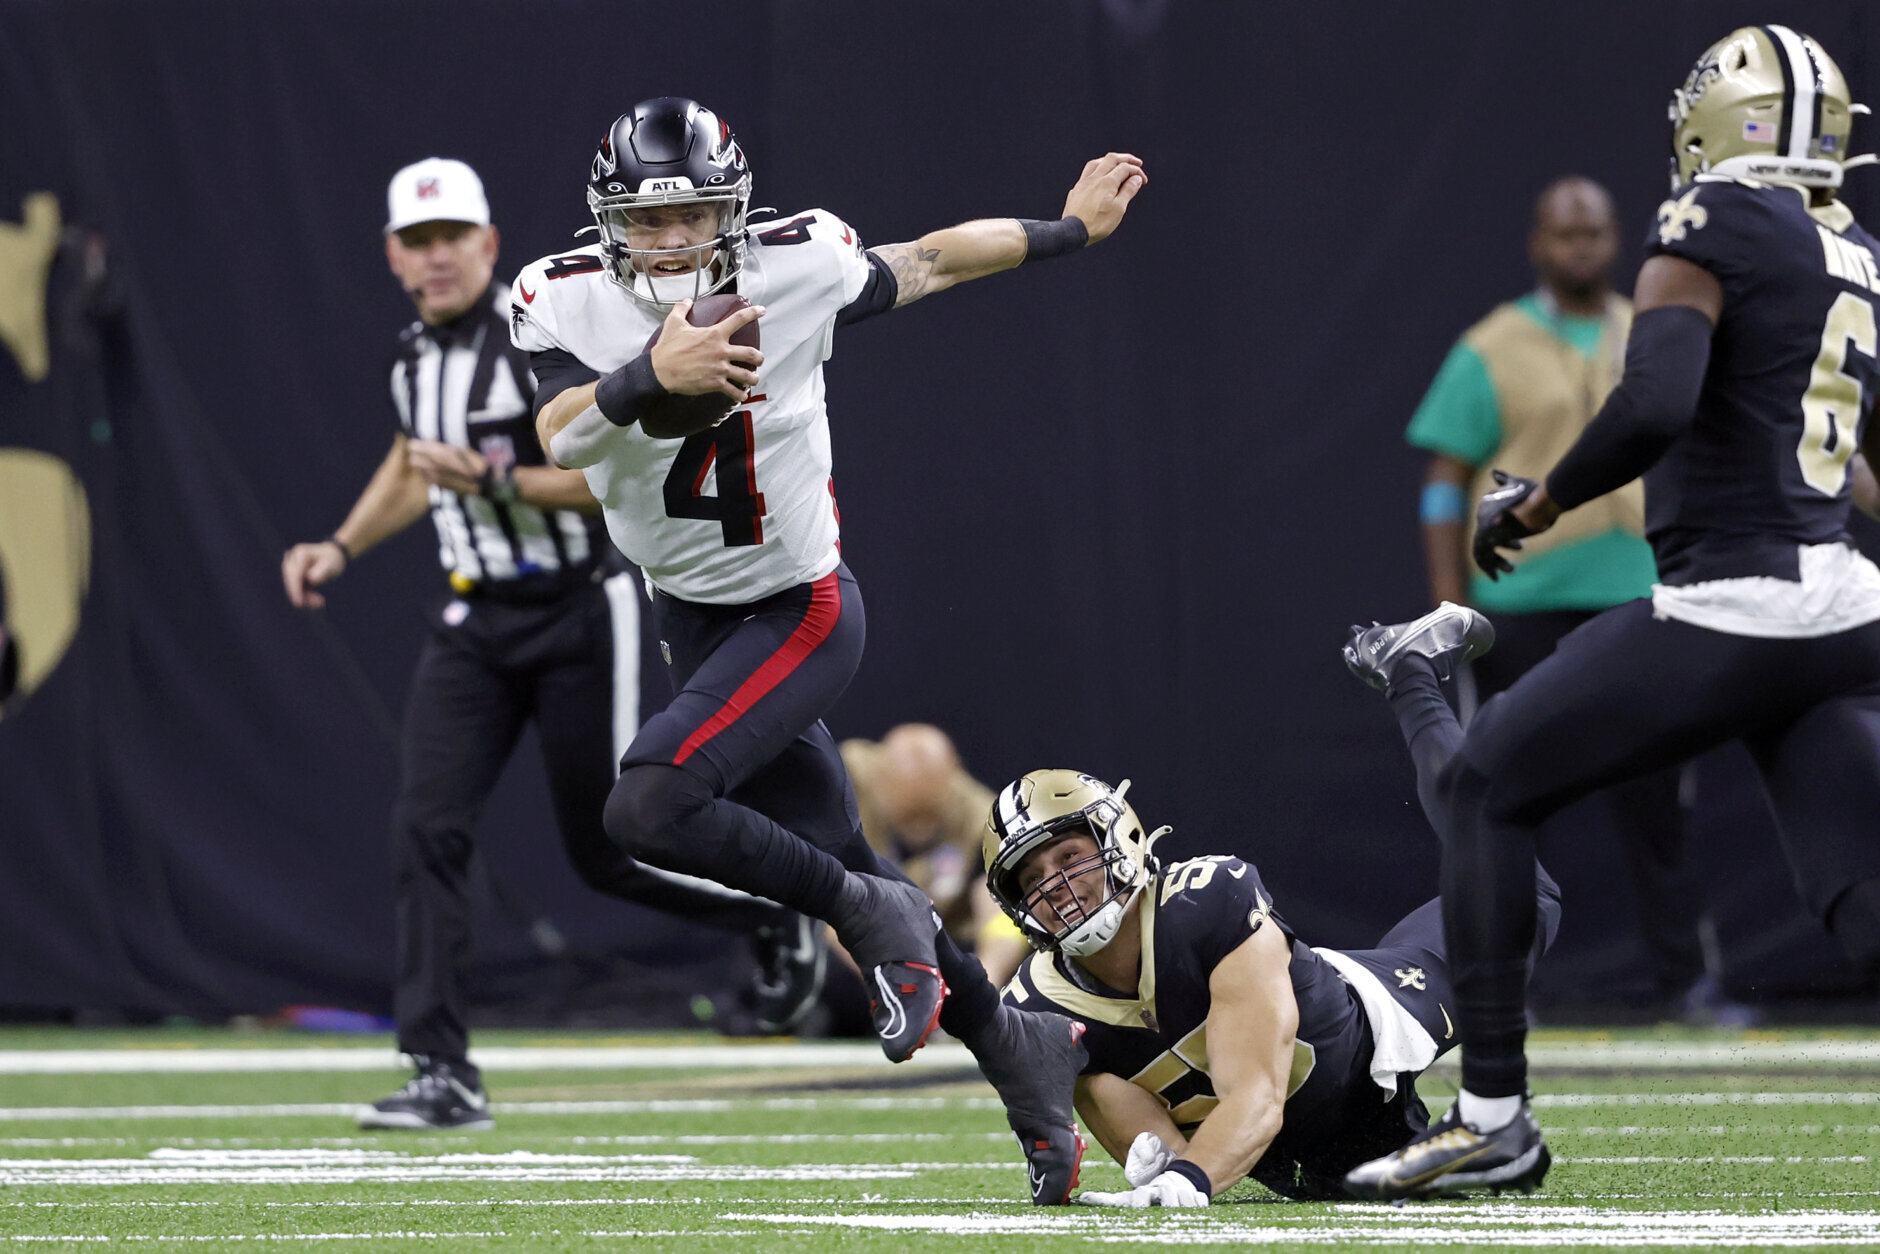 <p><em><strong>Falcons 18</strong></em><br />
<em><strong>Saints 21</strong></em></p>
<p>How bad is the NFC South, you ask? Even with this loss to fall to 1-4 in-division, Atlanta still has a chance to win it.</p>
